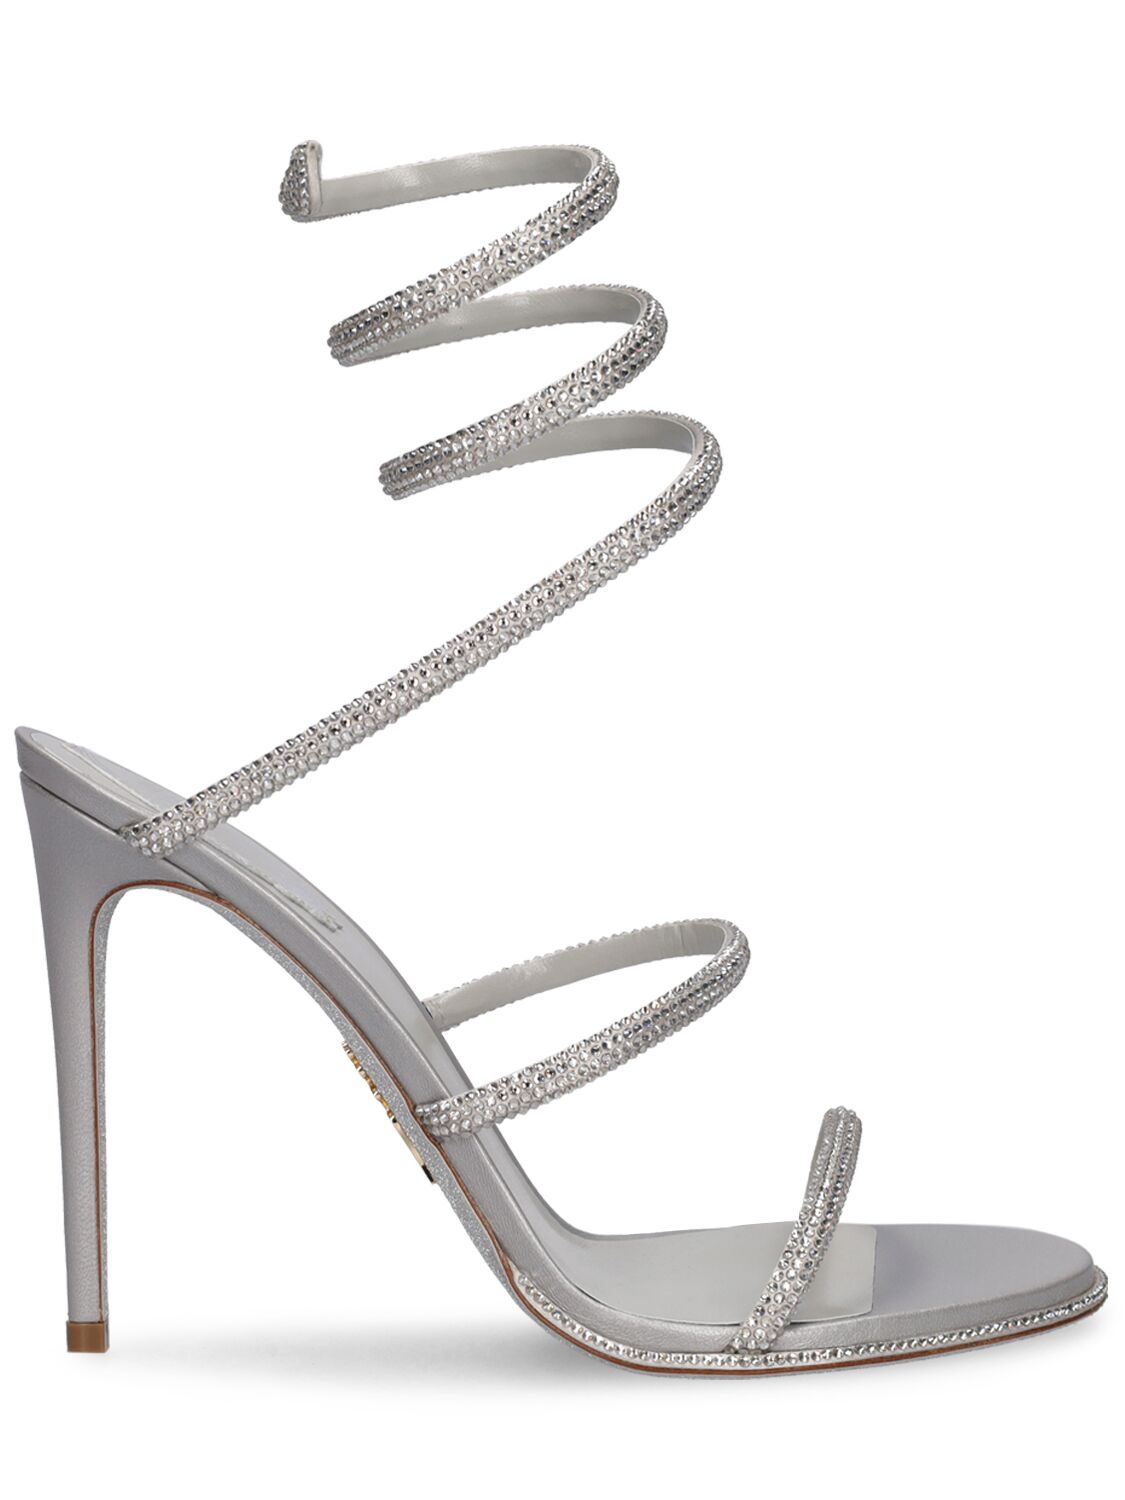 René Caovilla 105mm Embellished Leather Sandals In Silver